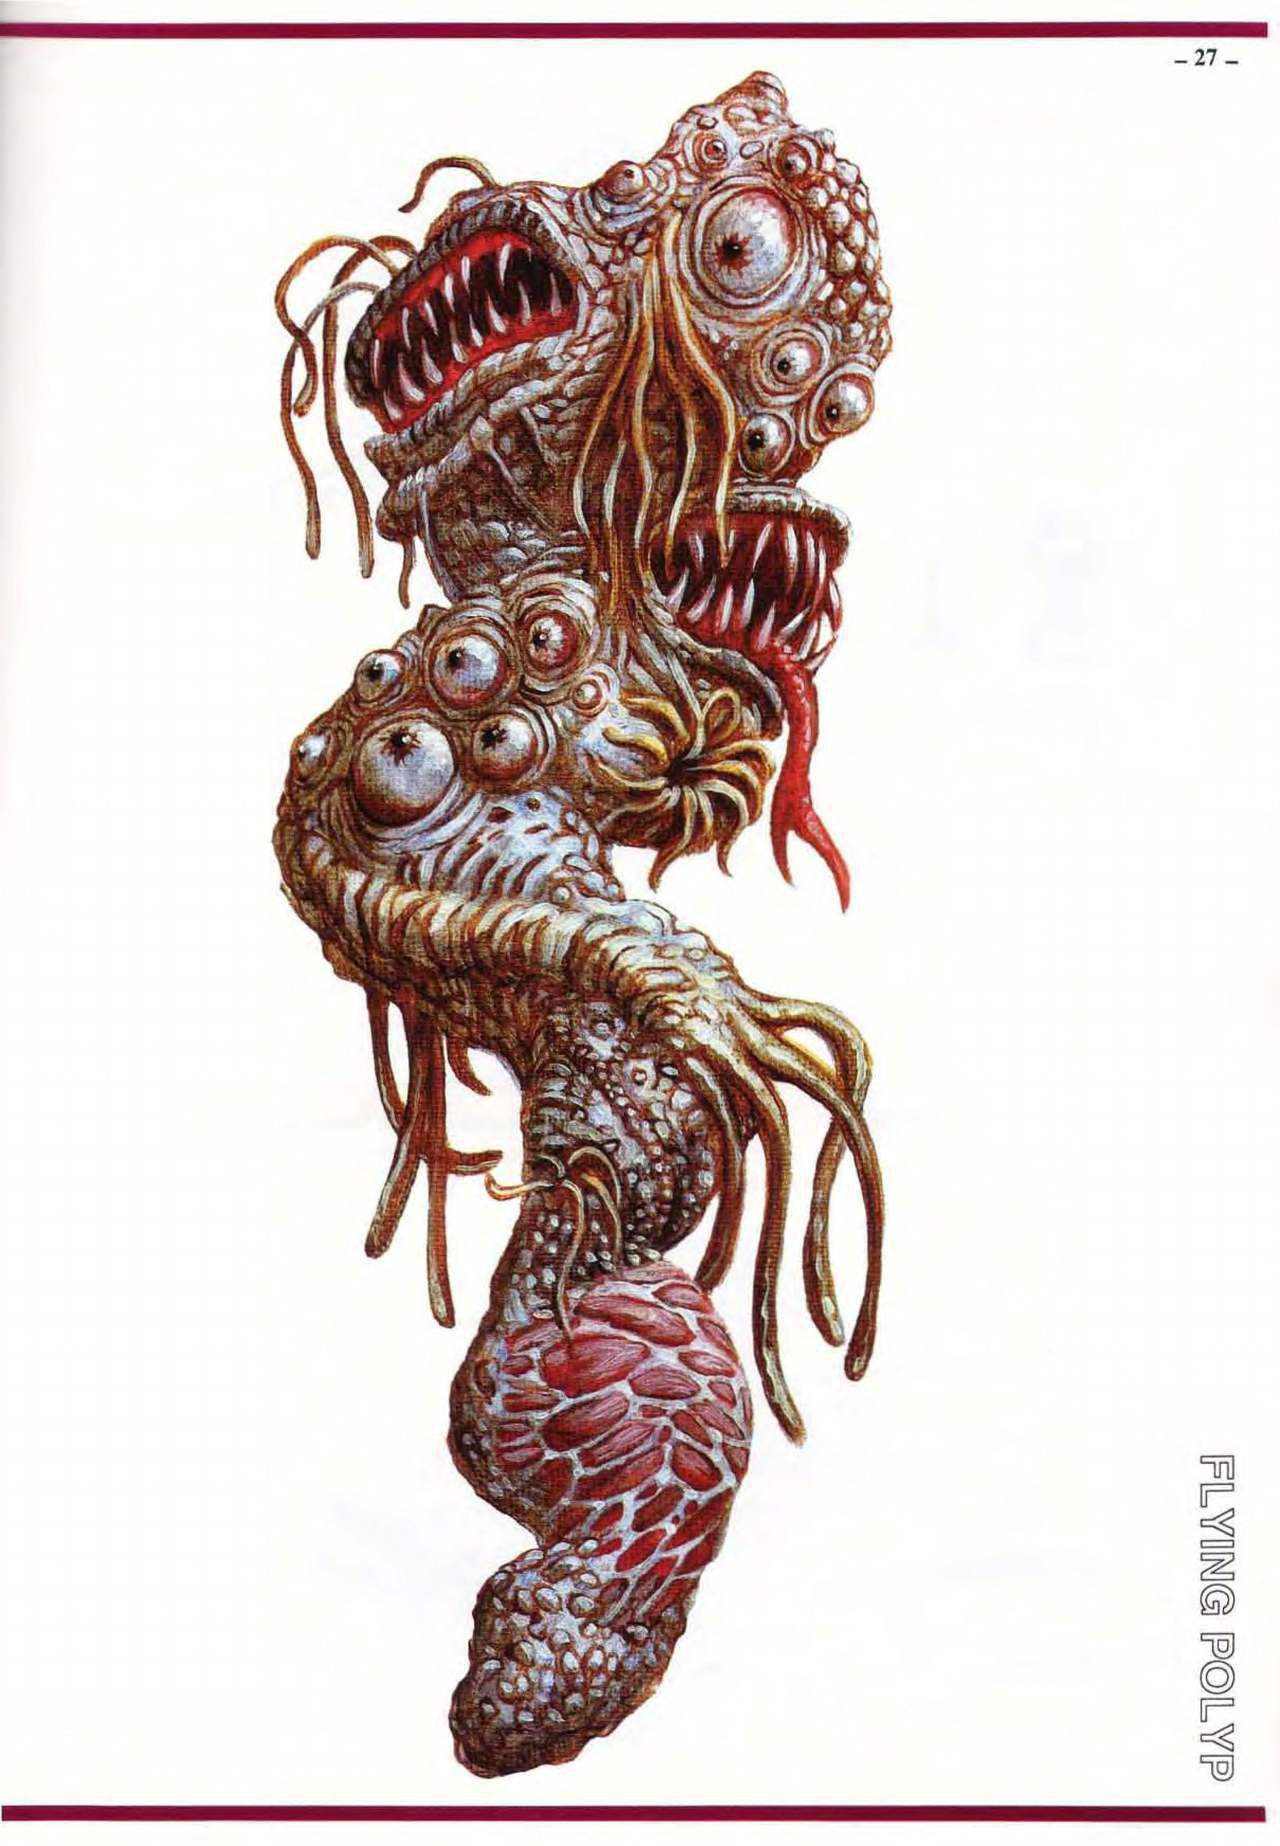 S. Petersen's Field Guide to Lovecraftian Horrors 27